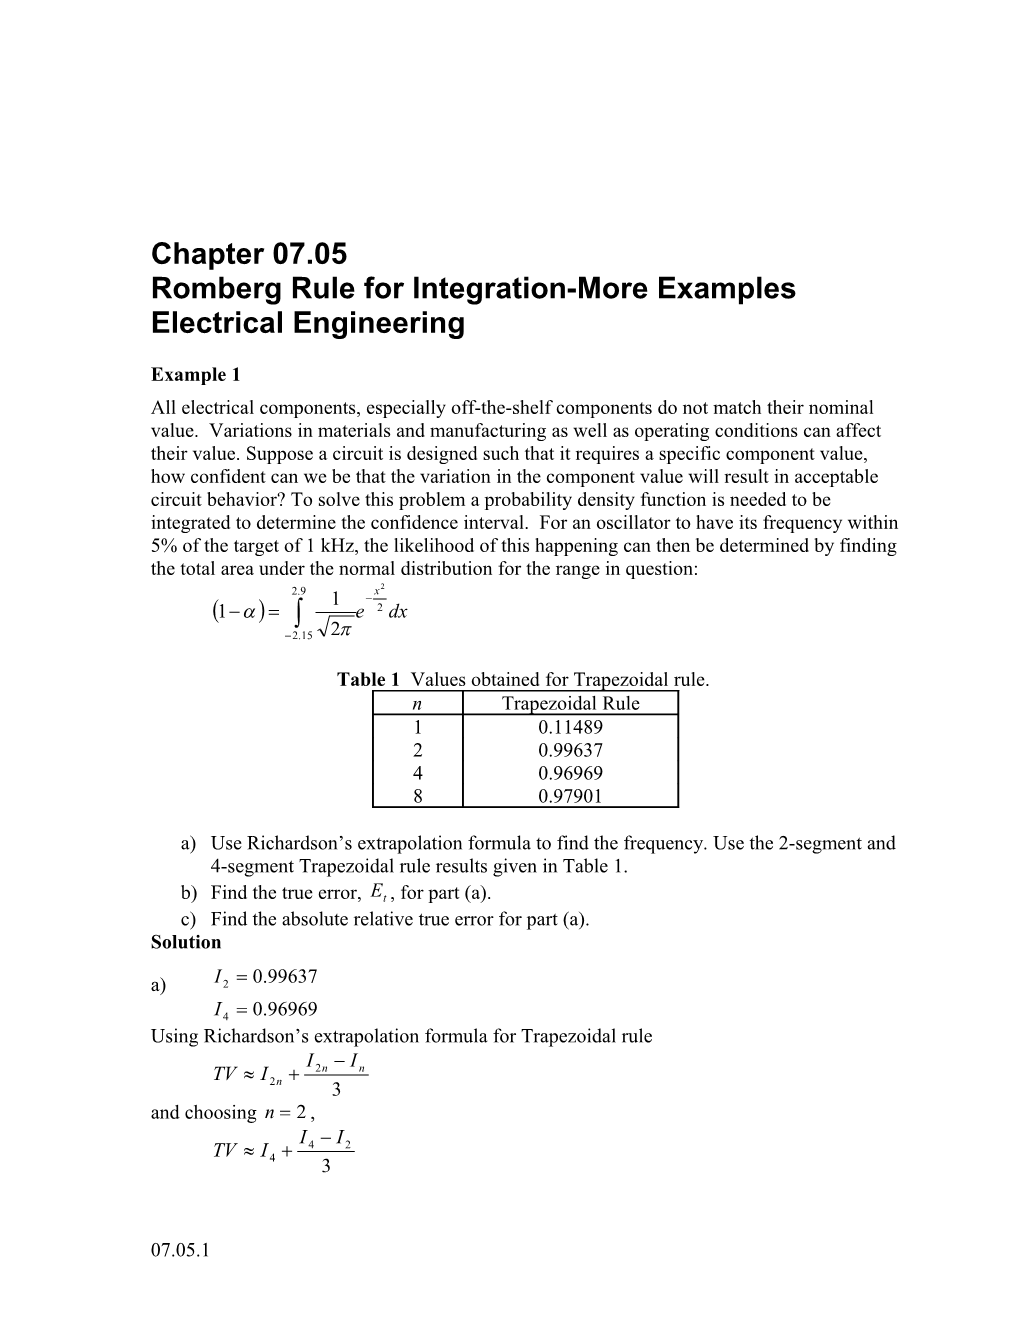 Romberg Rule for Integration-More Examples: Electrical Engineering